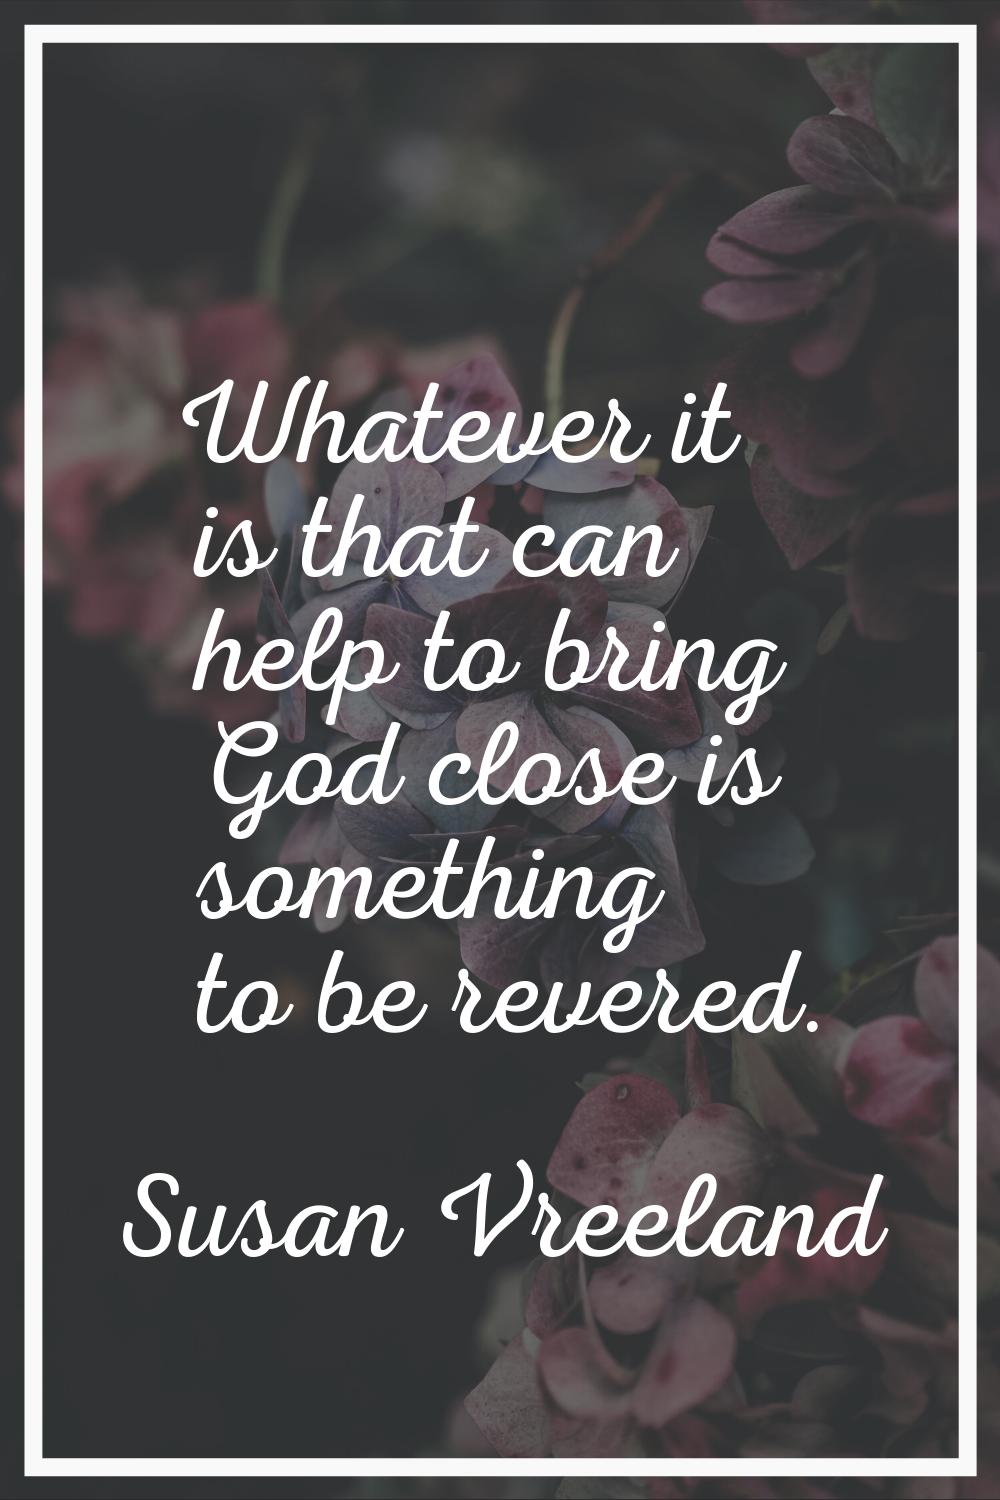 Whatever it is that can help to bring God close is something to be revered.